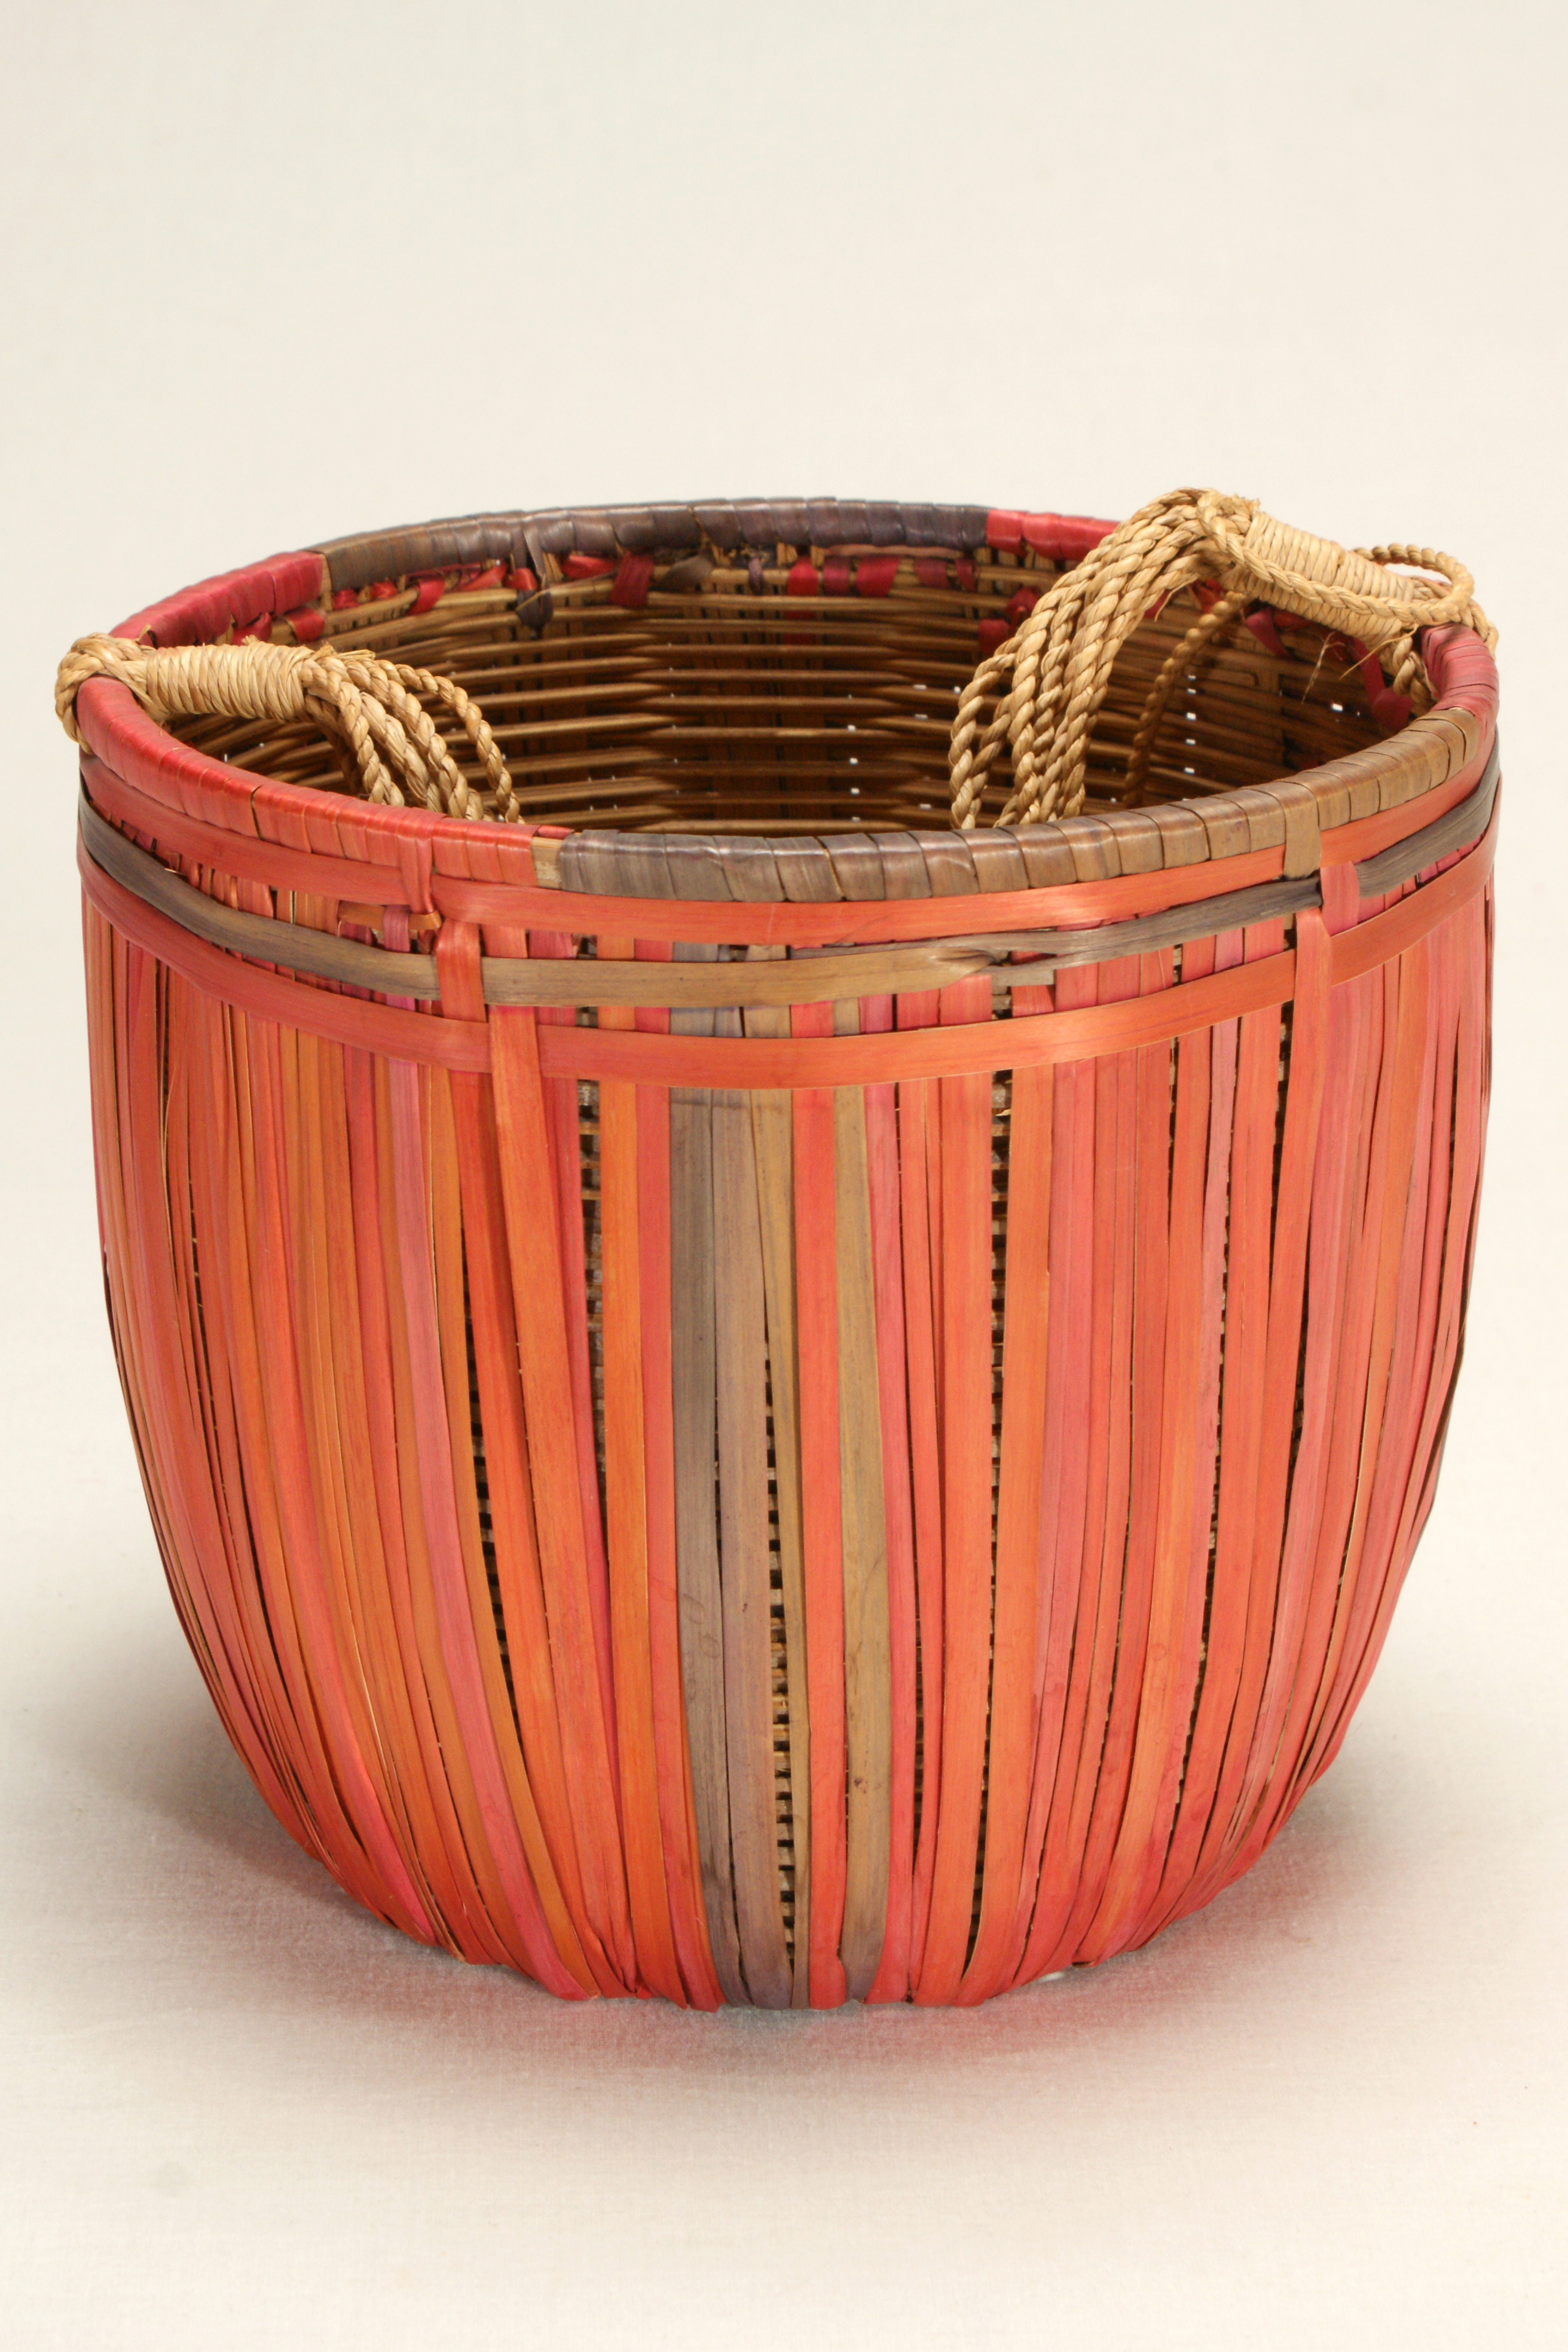 Fuchsia and green basket made of splint wood with a fiber handle.